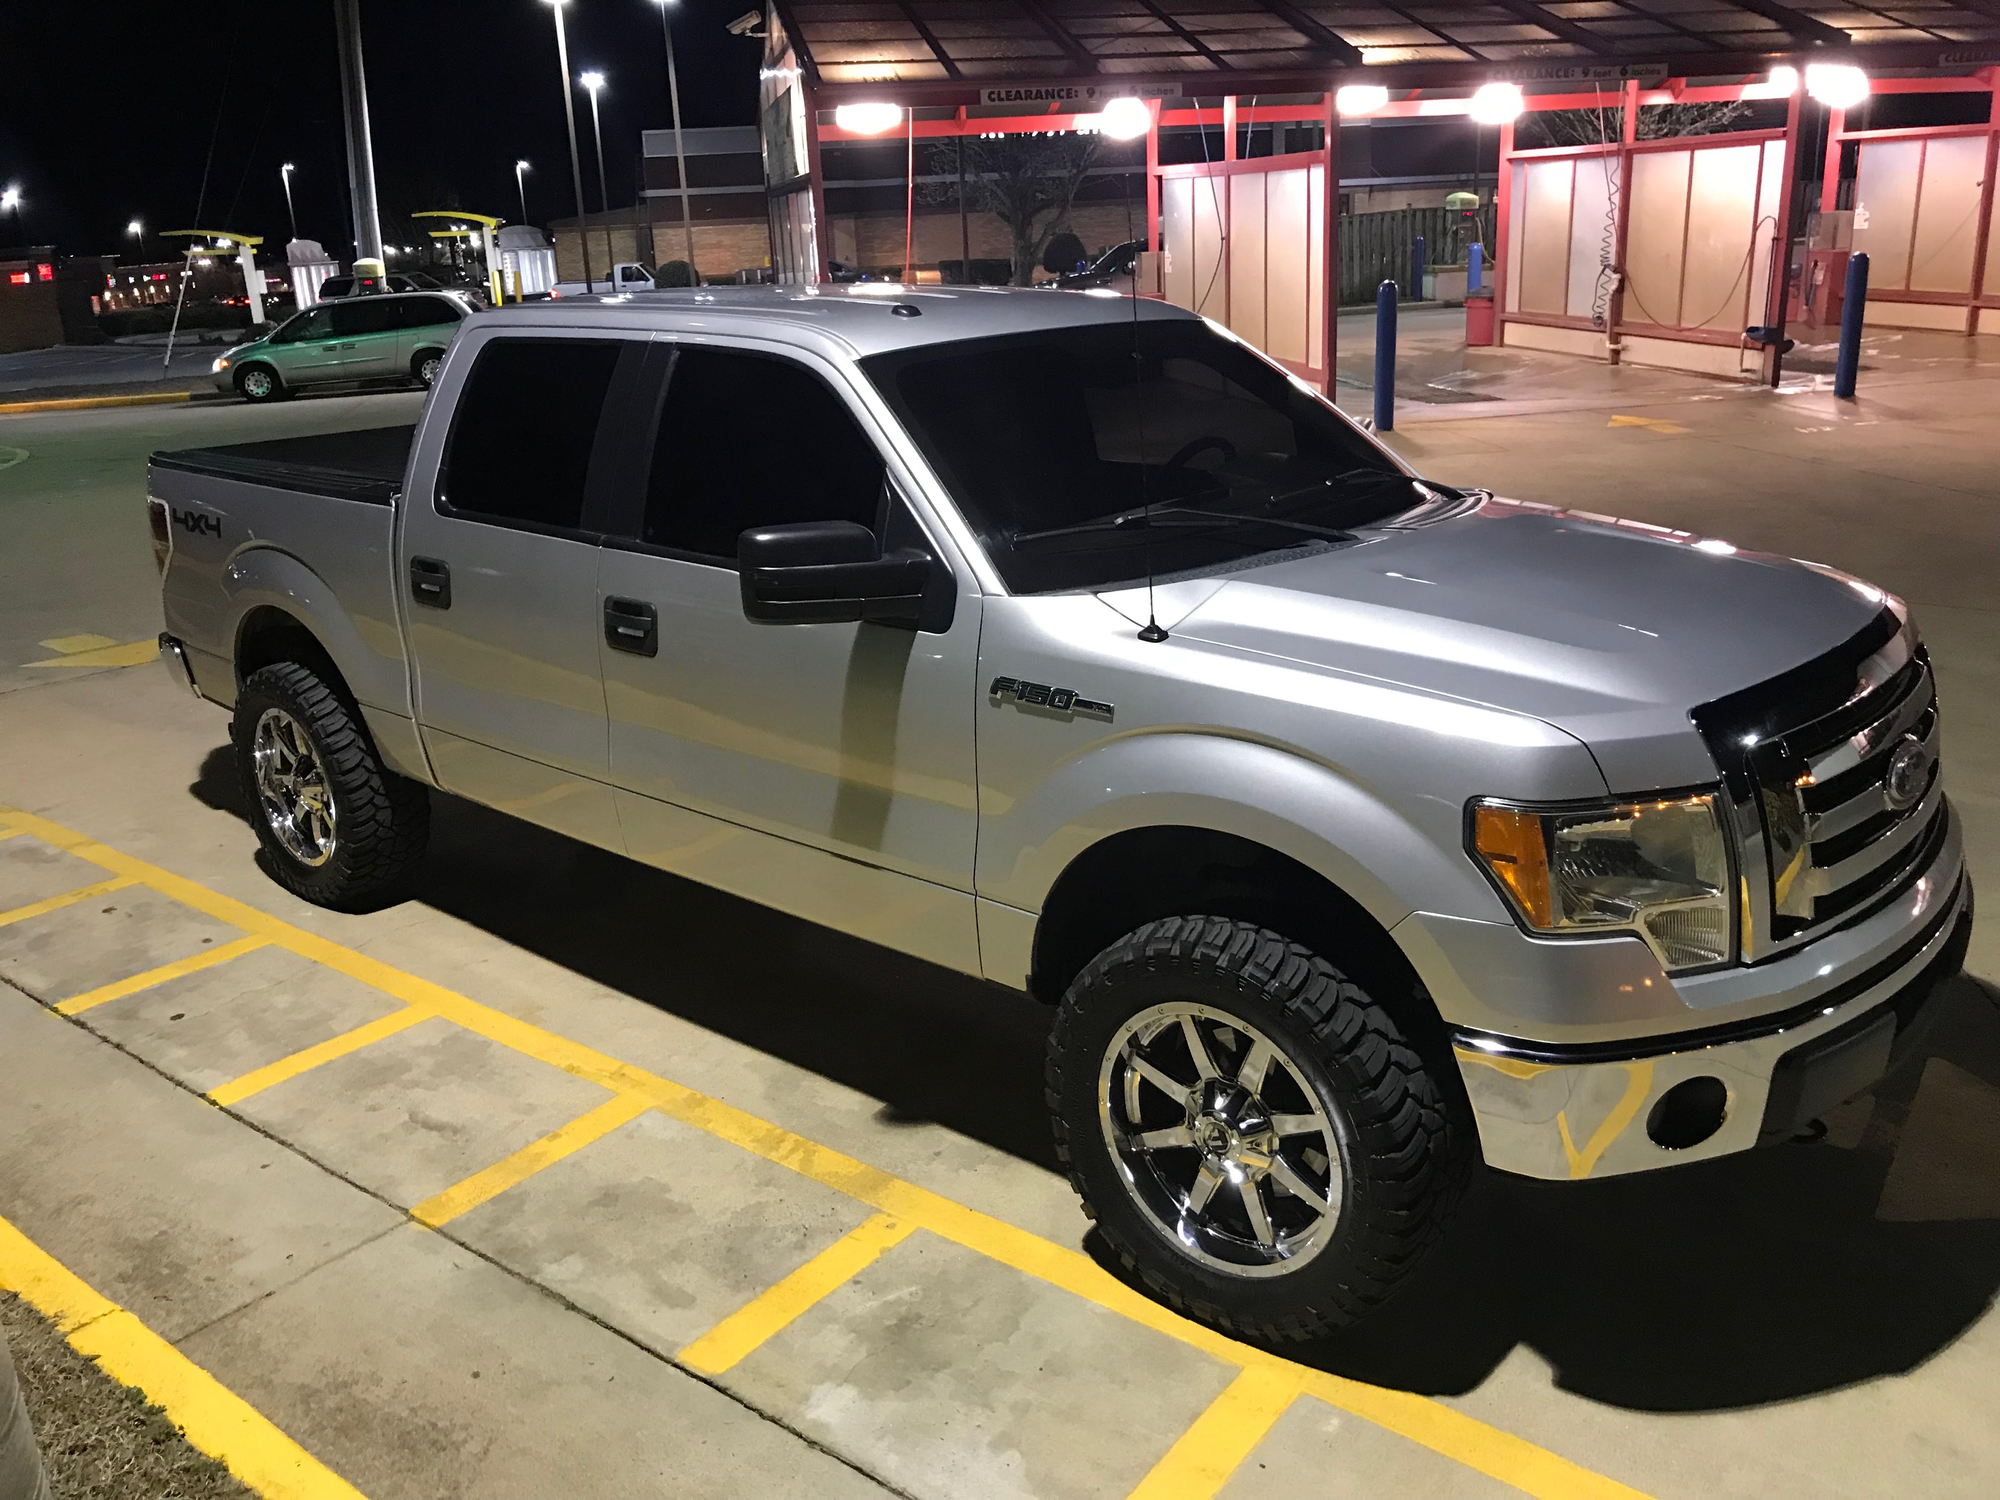 5.4 rebuild it, re-power it, or sell it - Ford F150 Forum - Community of Ford Truck Fans